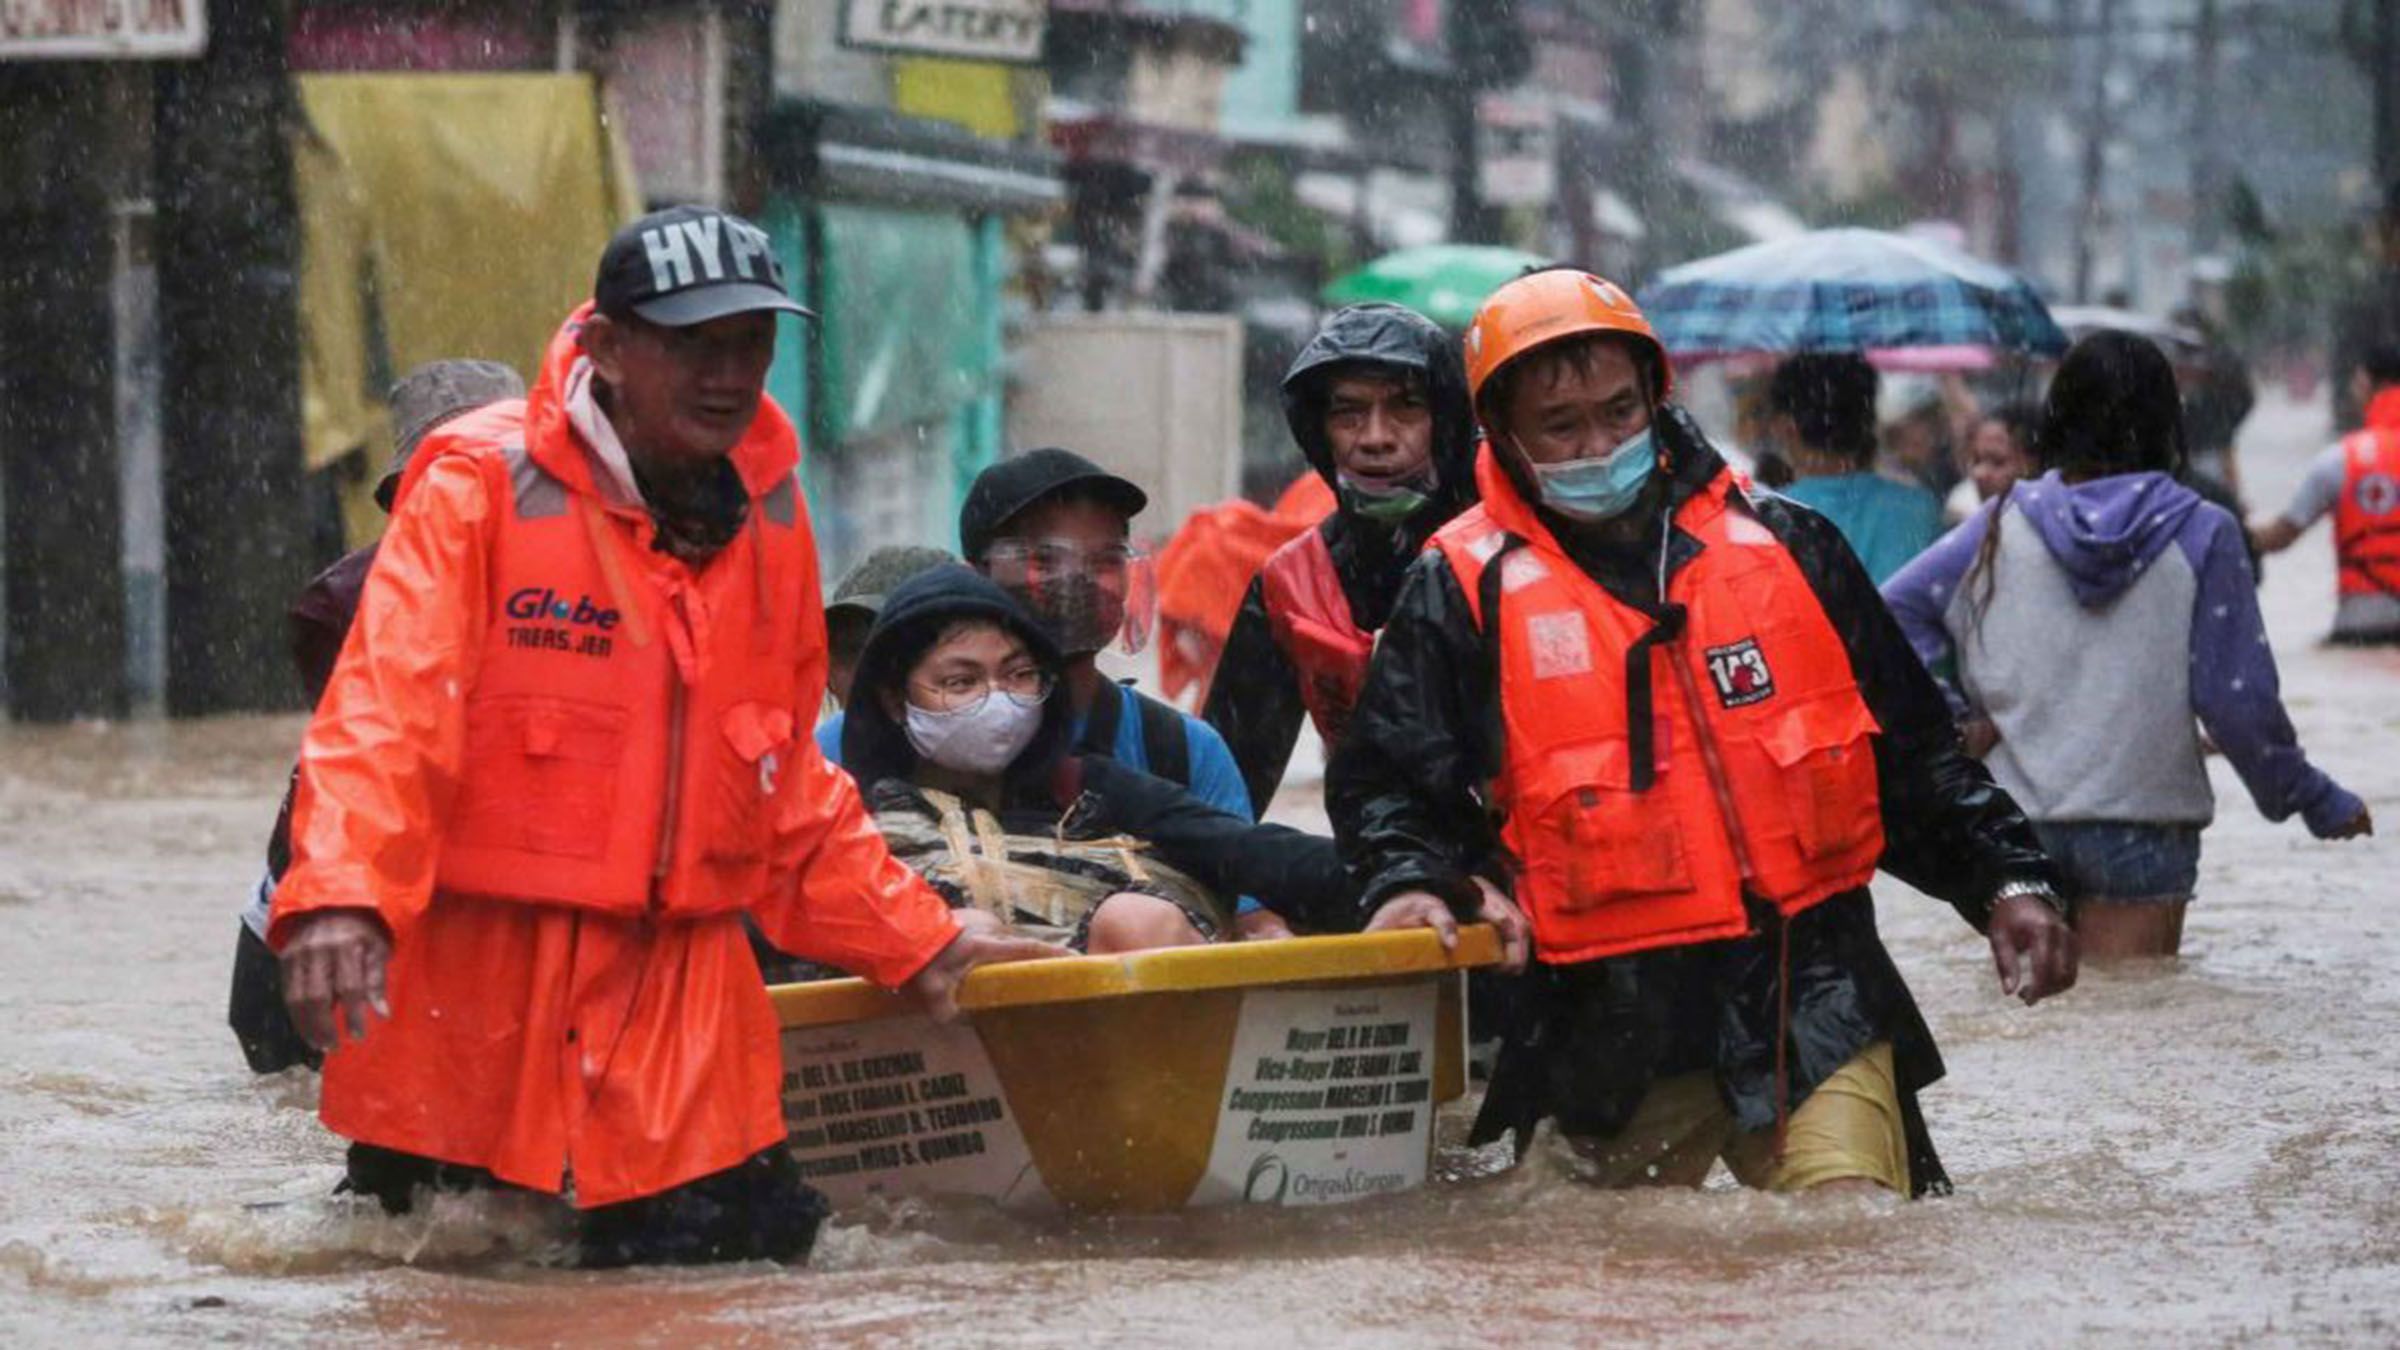 Rethinking Disaster Response in the Philippines